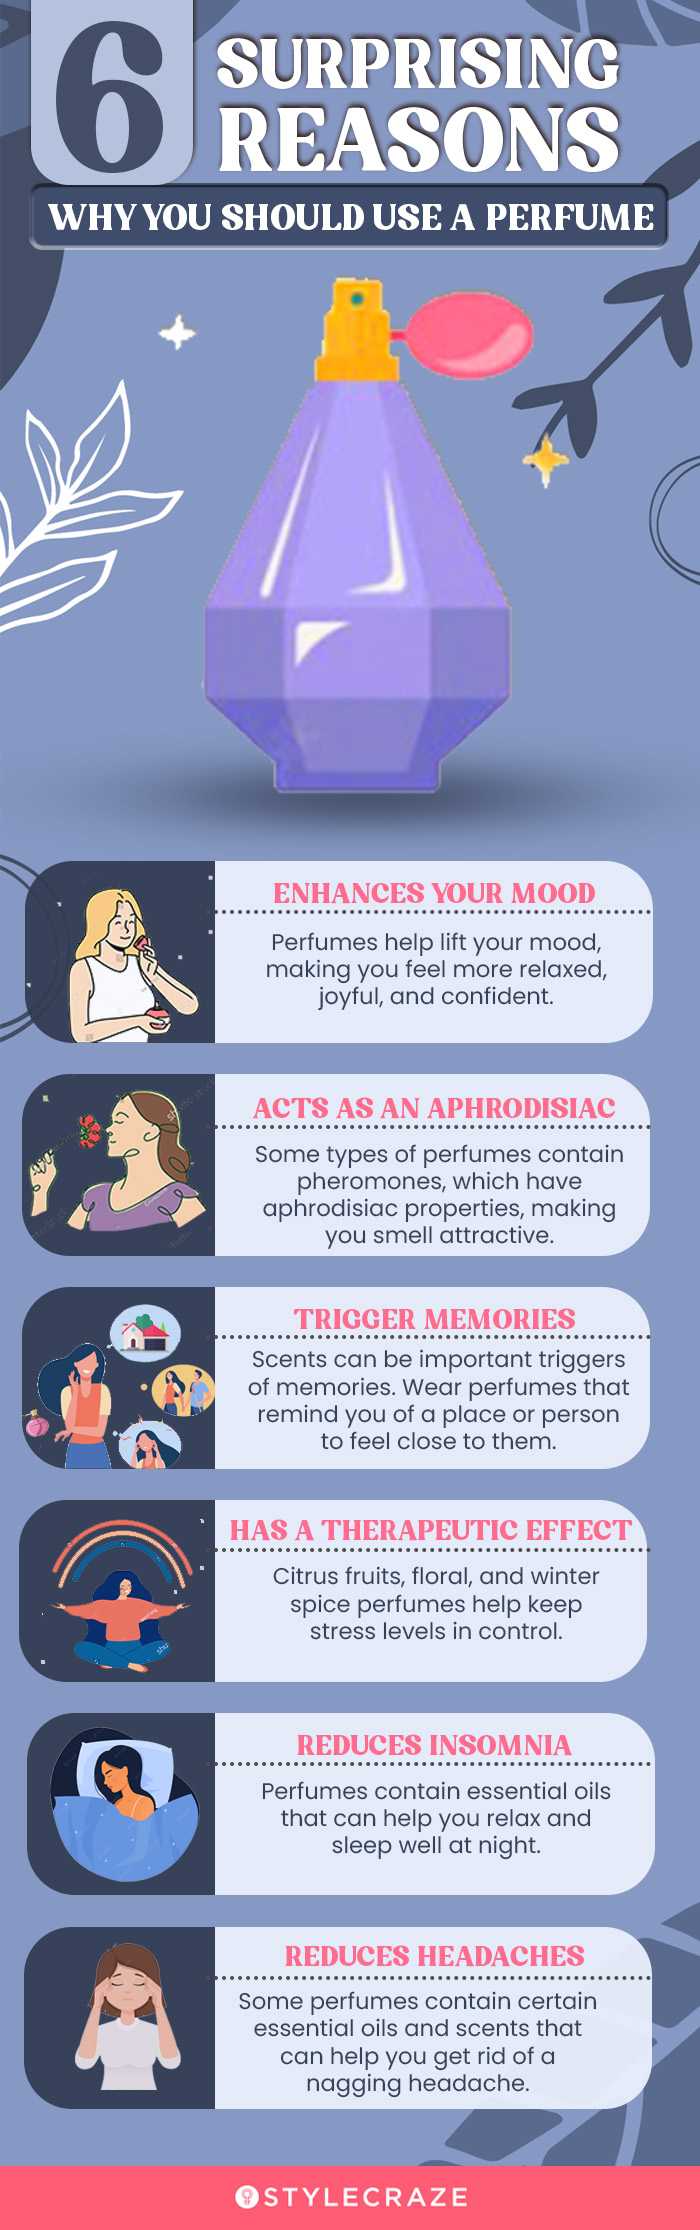 6 surprising reasons why you should use a perfume [infographic]